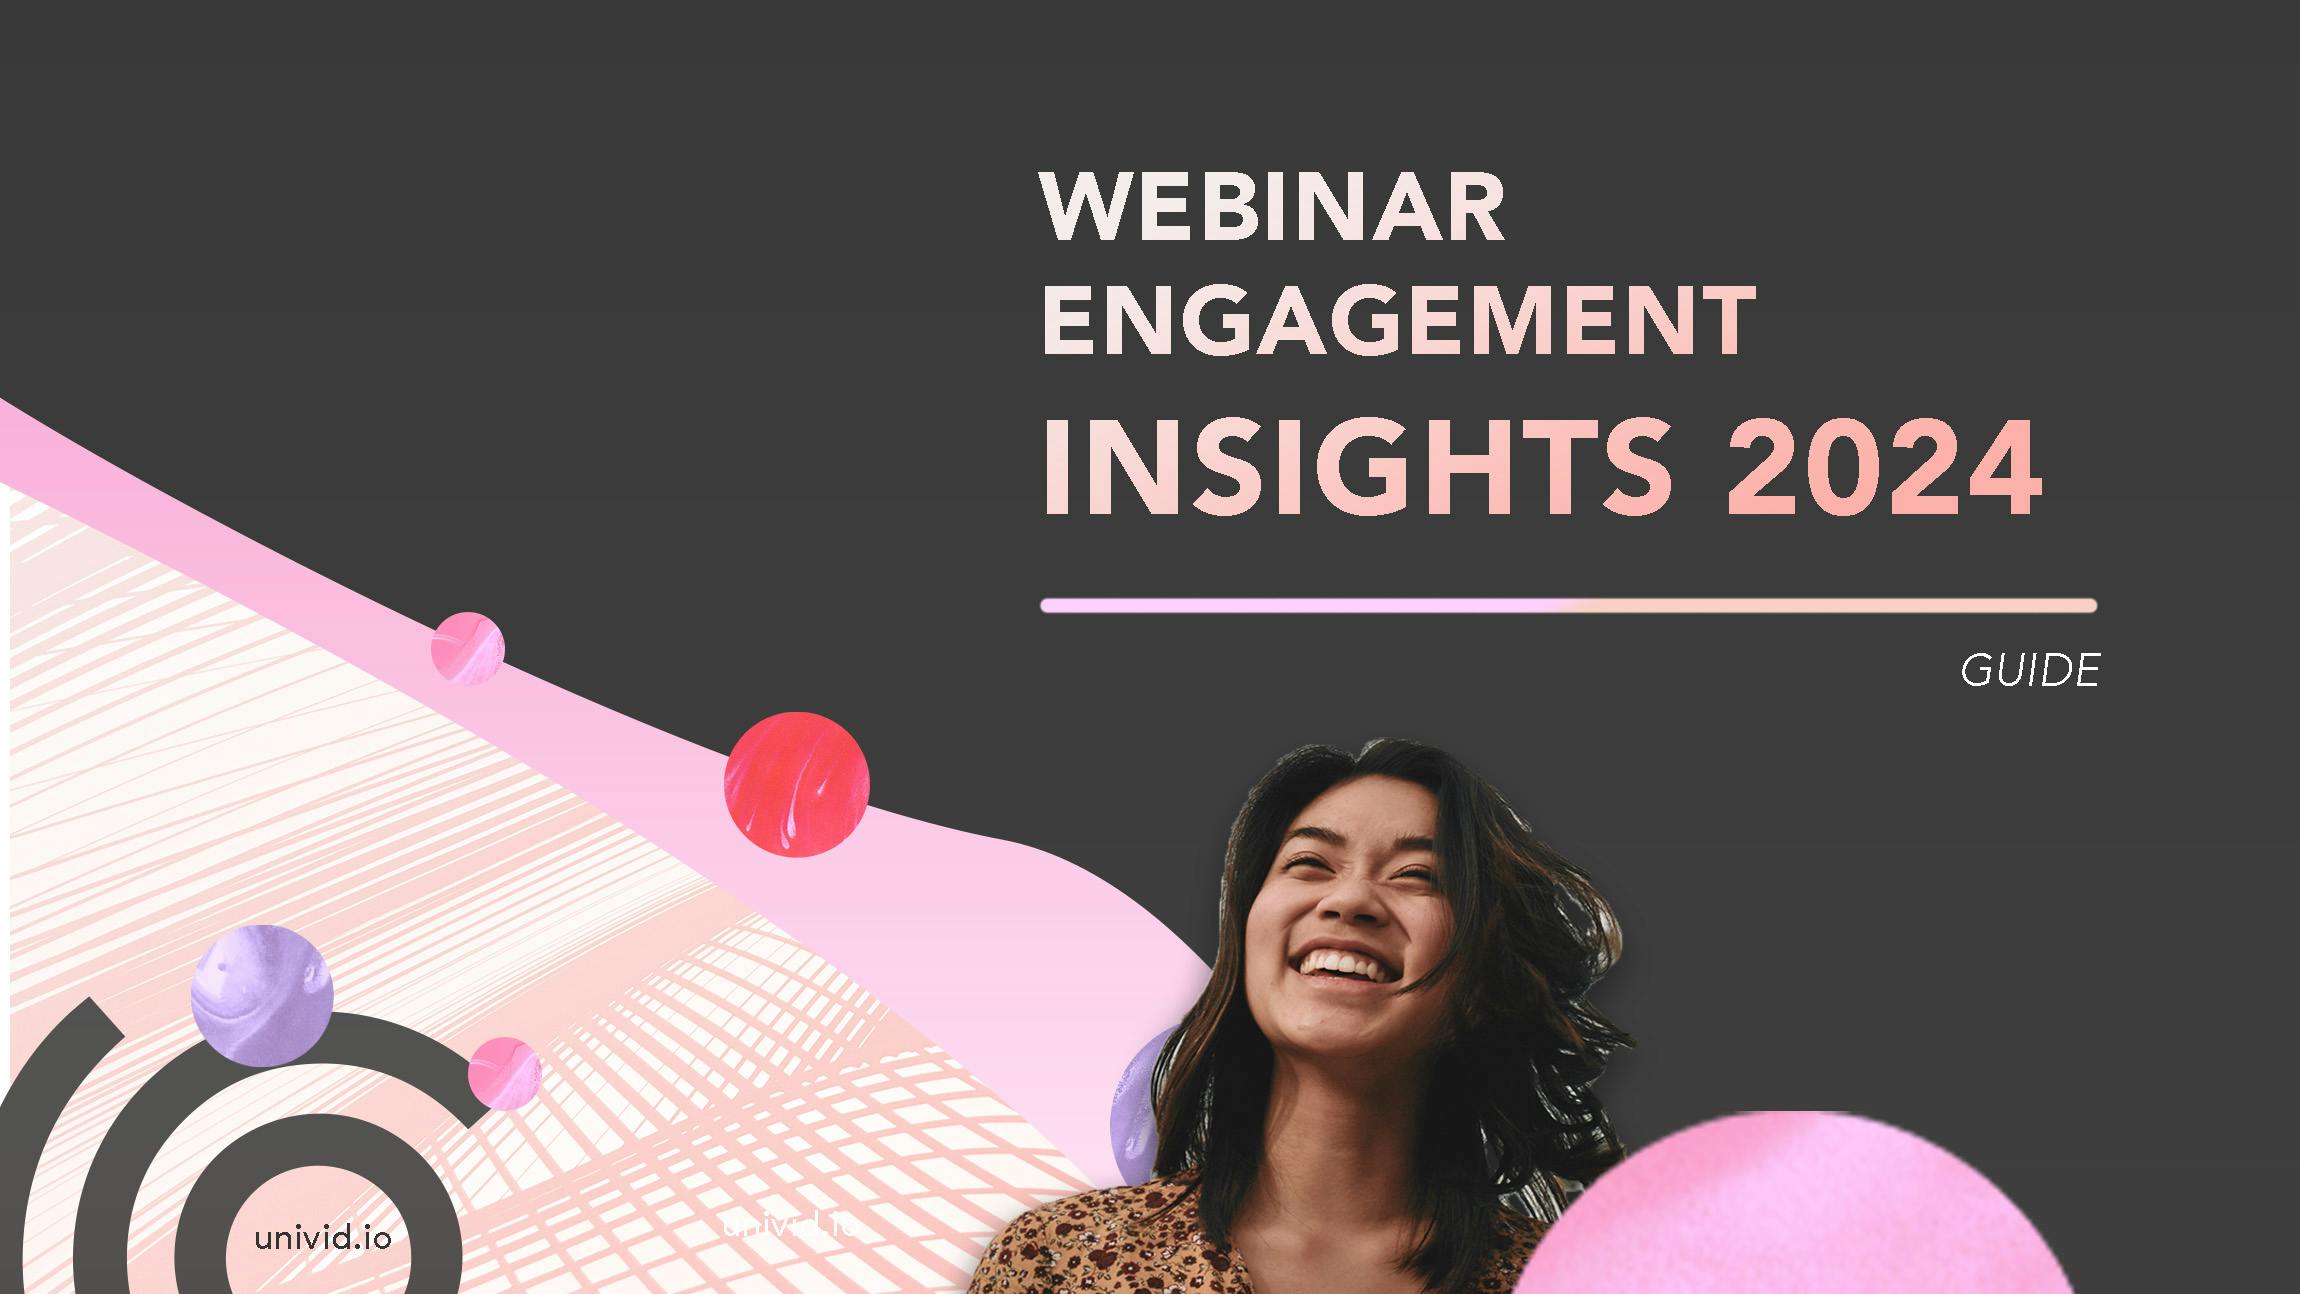 The latest insights, data and statistics on engagement in webinars. How to create an interactive webinar.